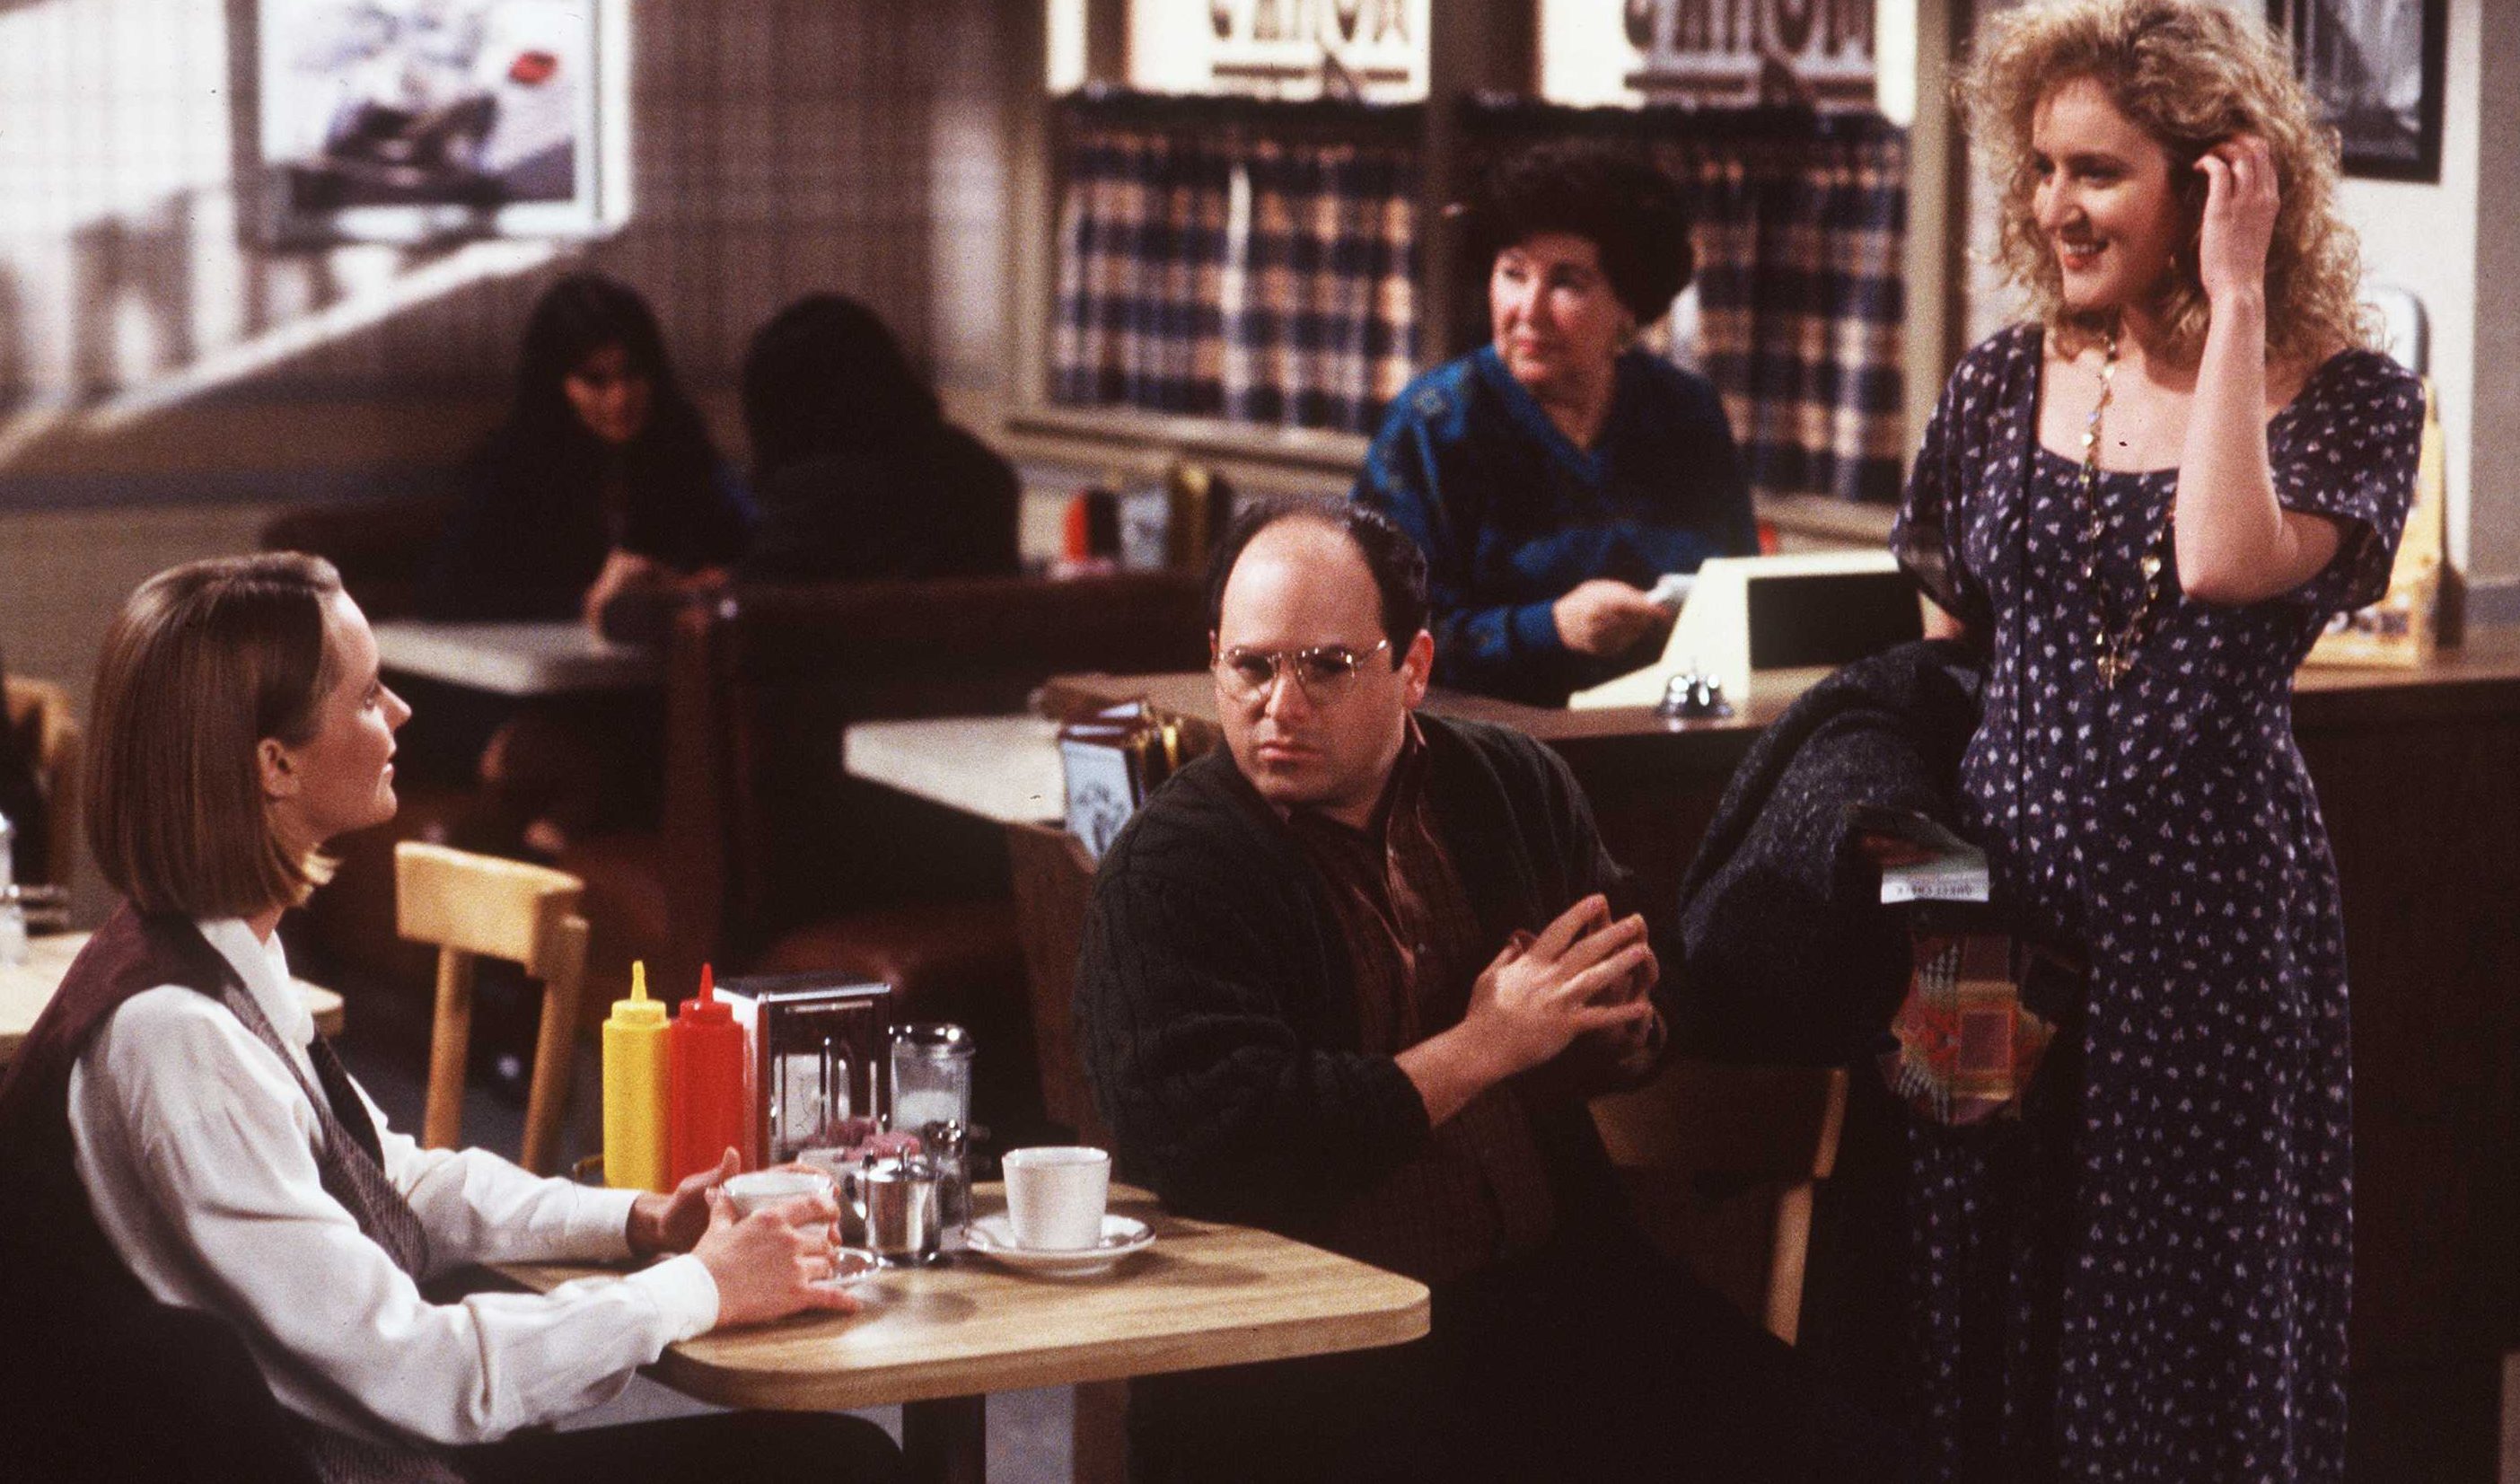 3/3/93 "Seinfeld" -"The Smelly Car" Jason Alexander And Heidi Swedberg (Photo By Getty Images)